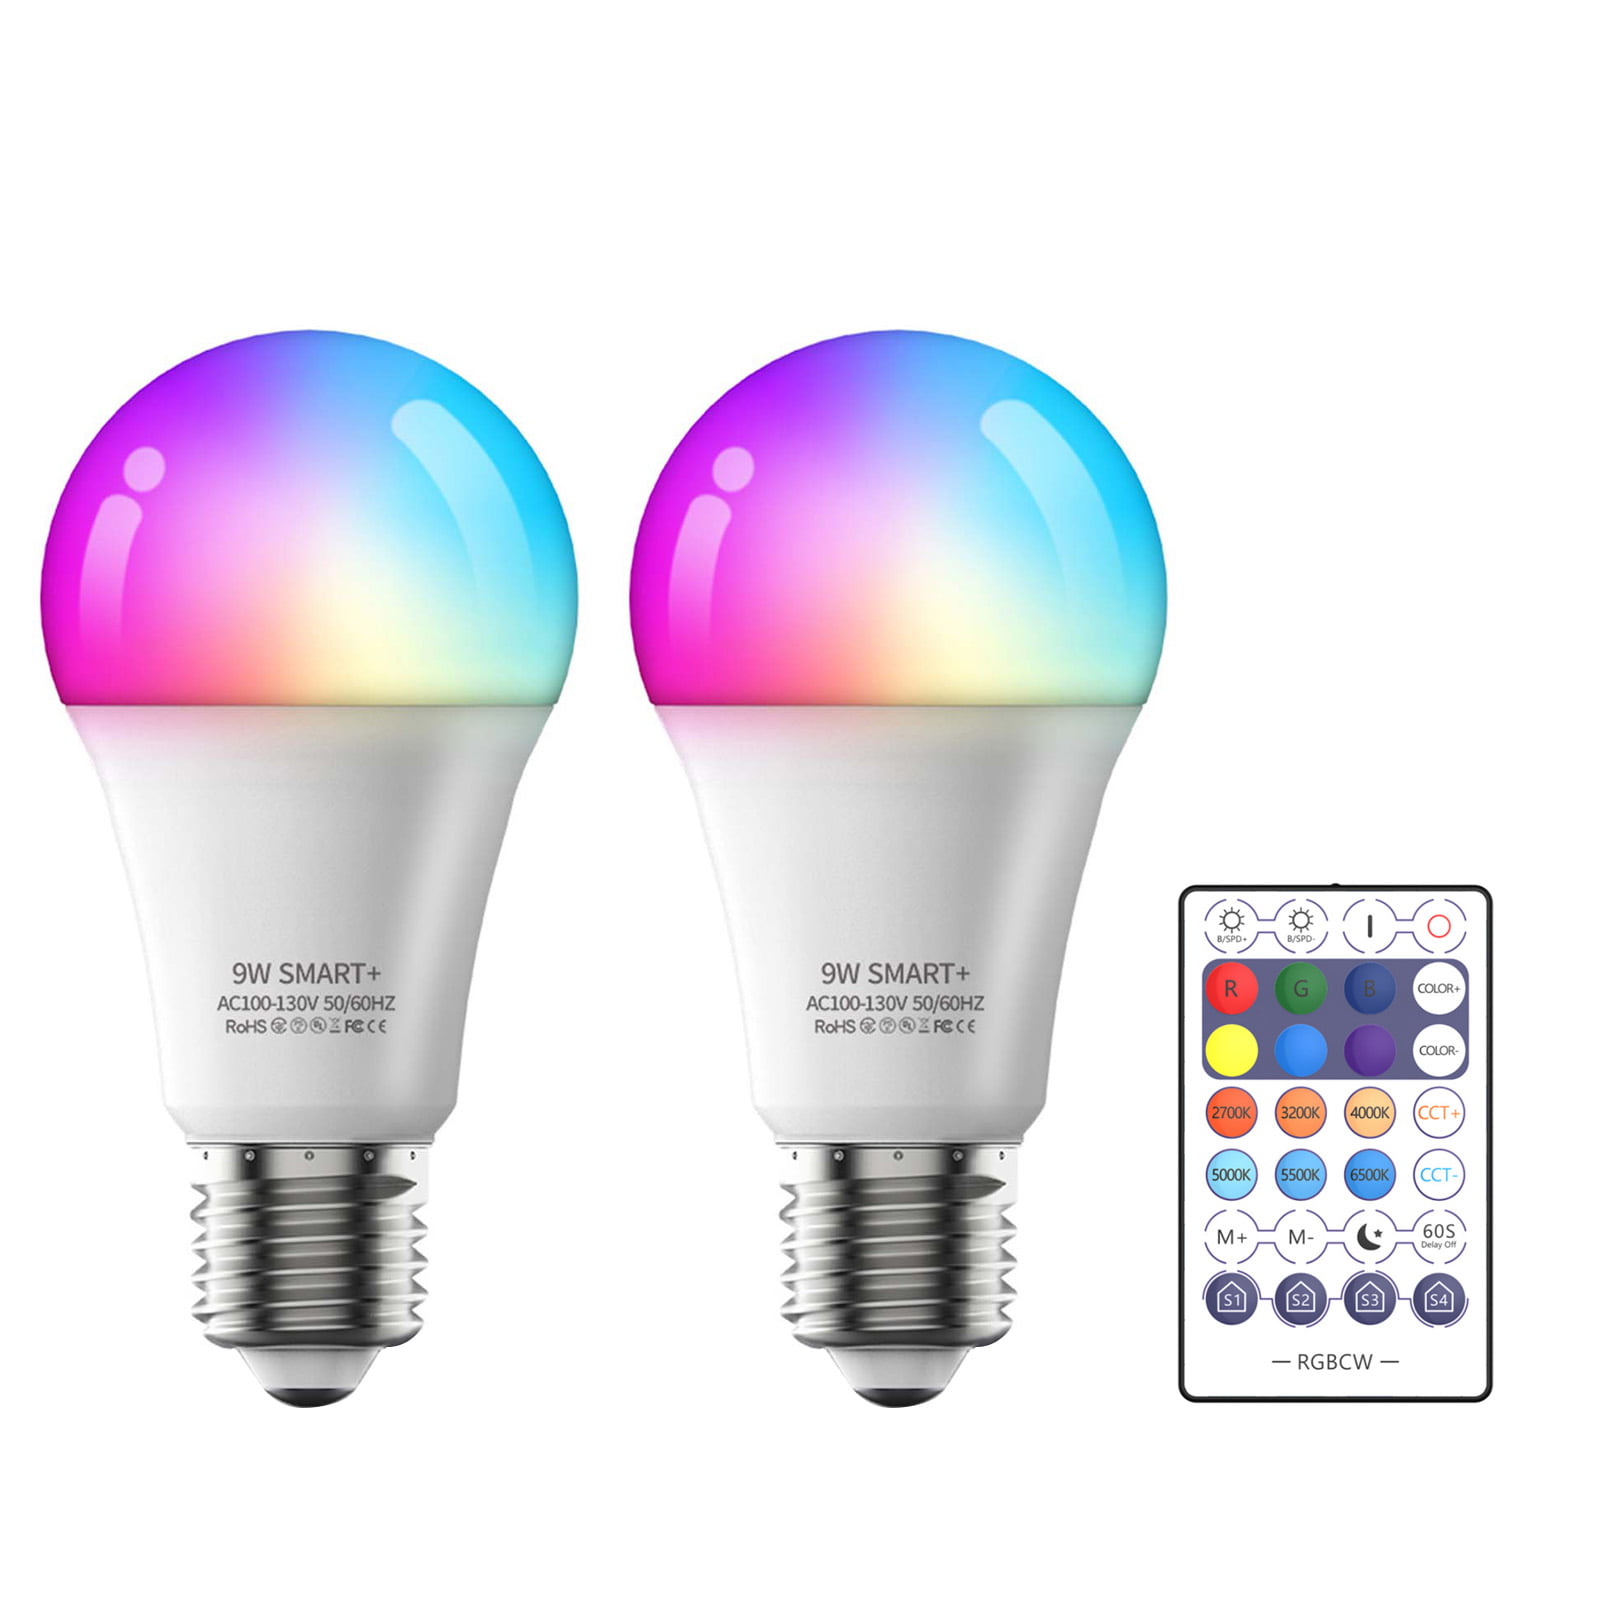 Details about   WiFi LED Smart Light Bulb Color Changing Lamp All Voice Control 